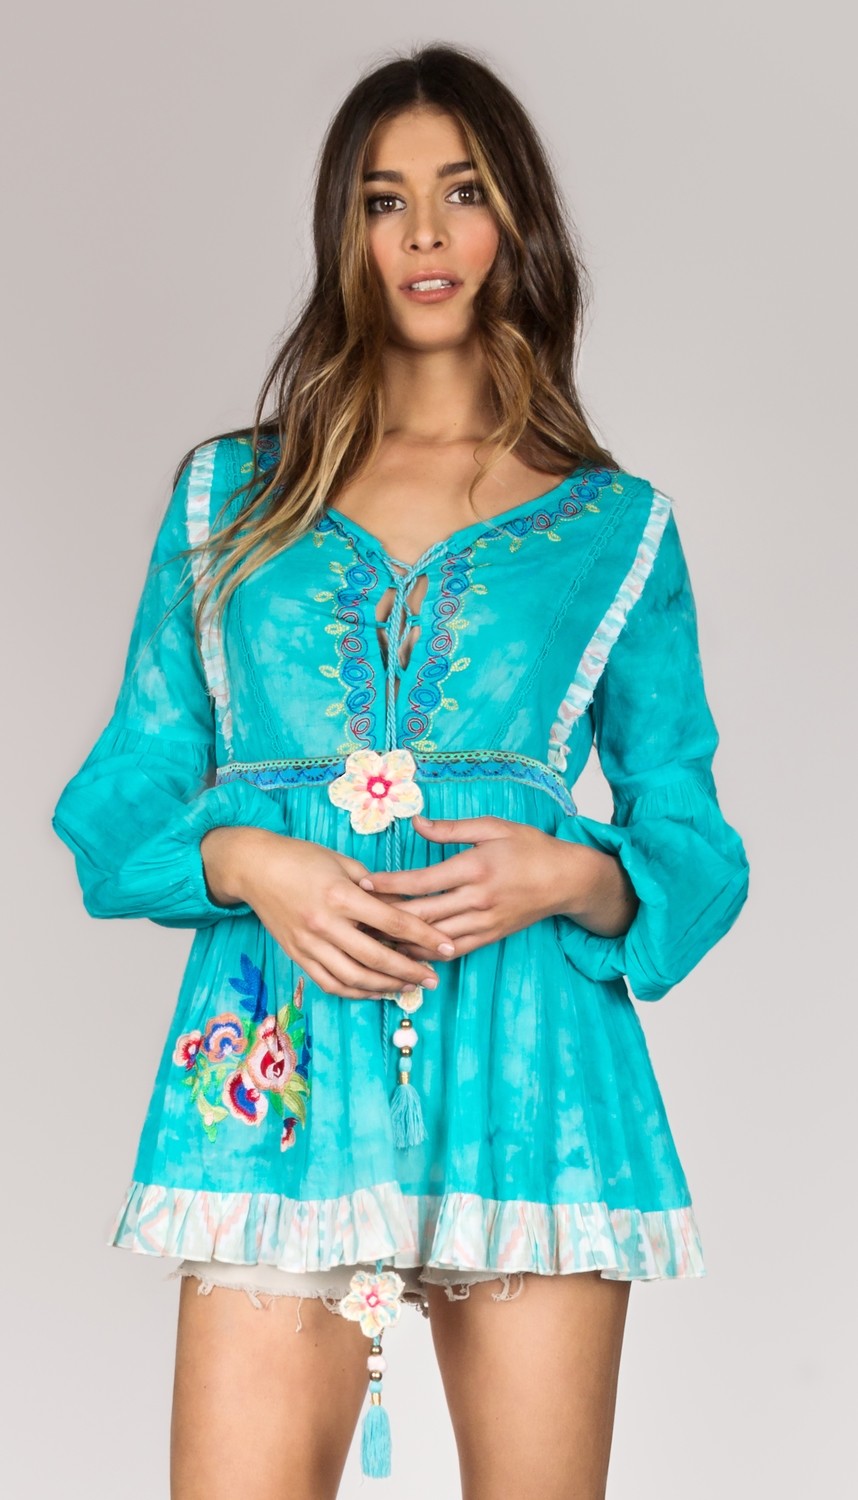 Shoklett: Tied Bodice Fit & Flare Sea Flower Tunic Sherlyn SOLD OUT